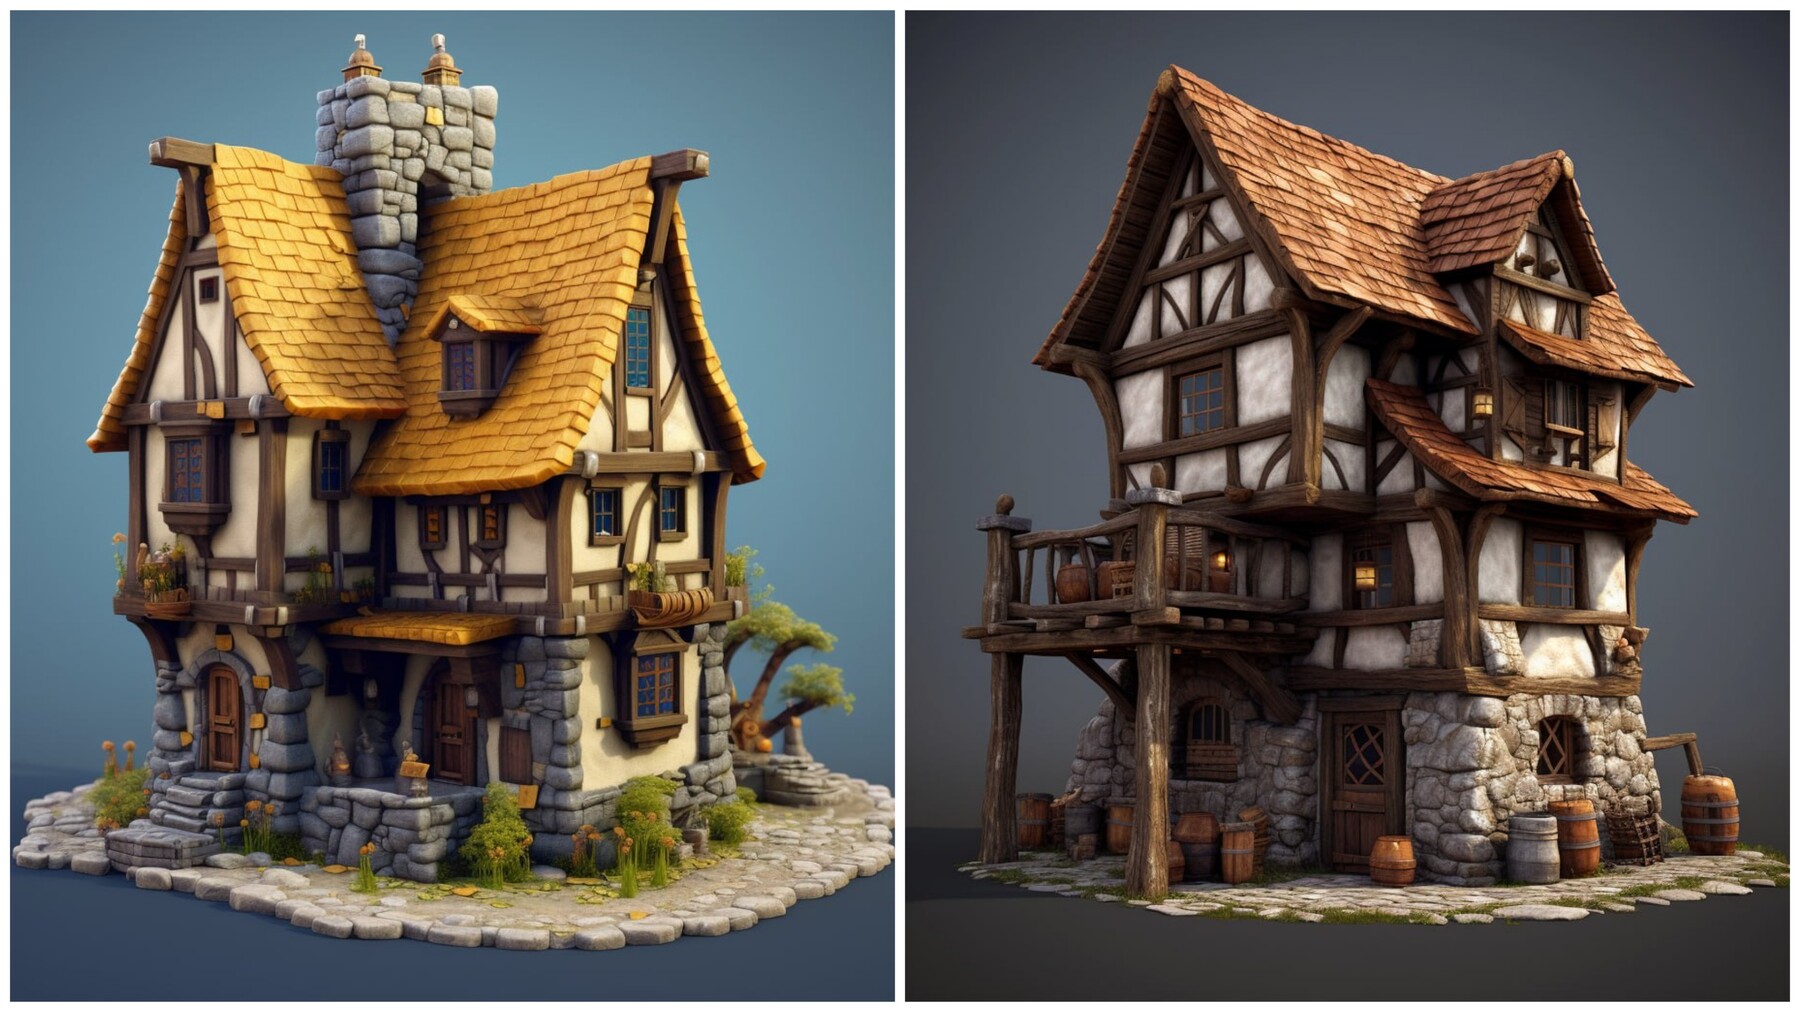 High detail image of a modern twist on a medieval-style house in